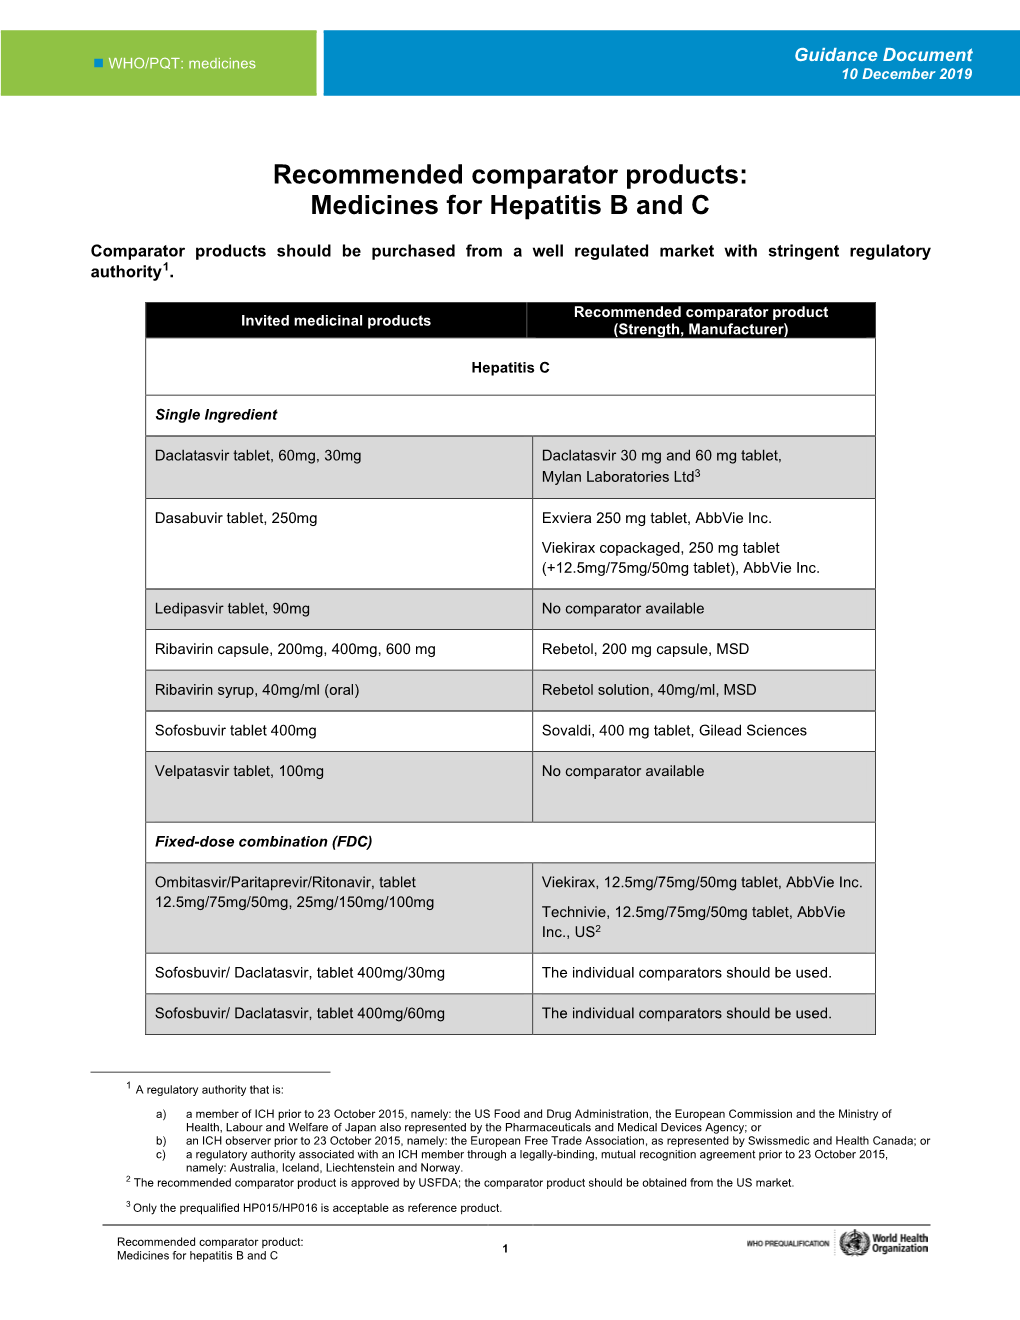 Recommended Comparator Products: Medicines for Hepatitis B and C